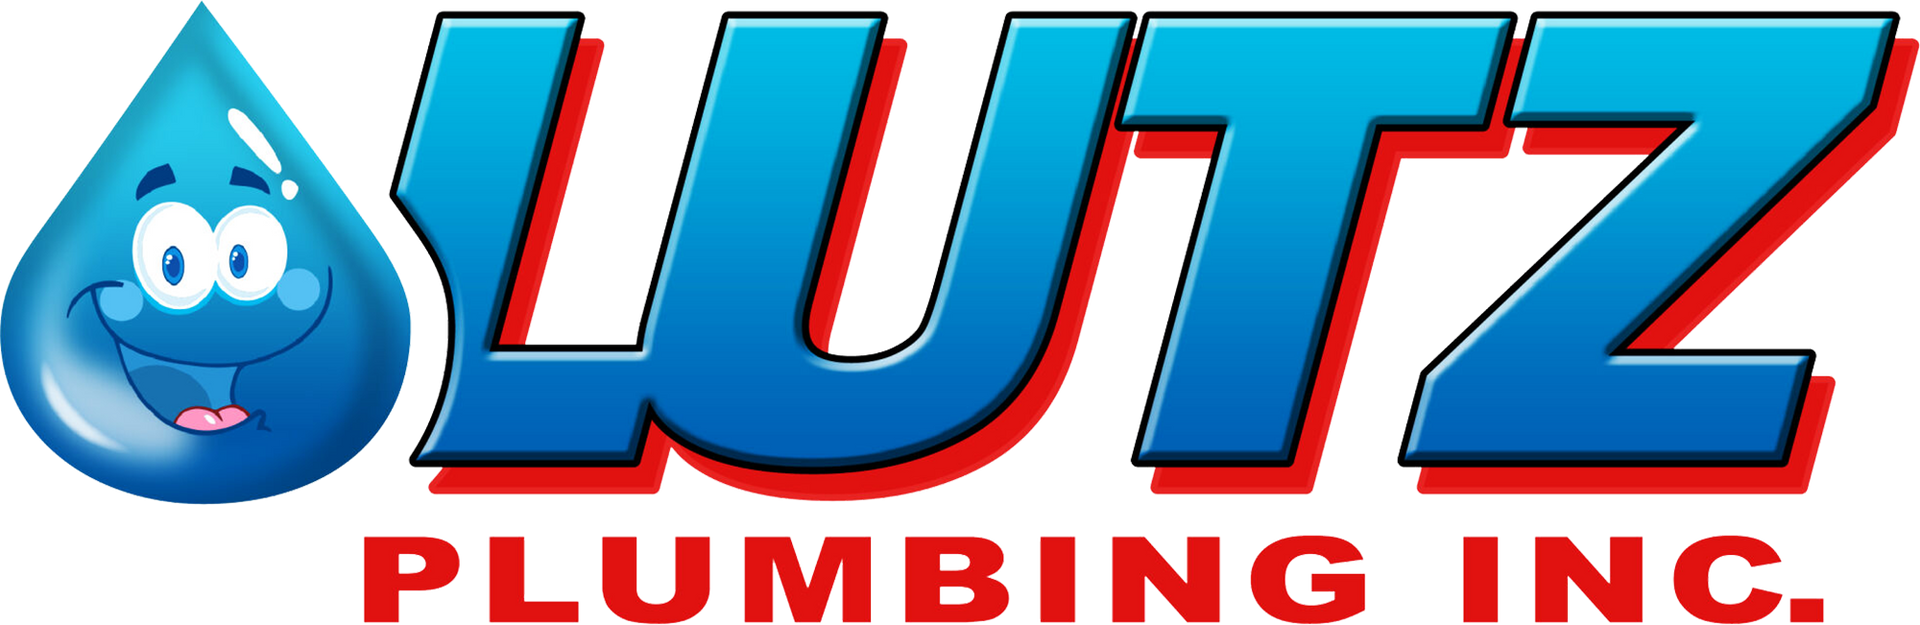 the logo for lutz plumbing inc. has a water drop with a face on it .